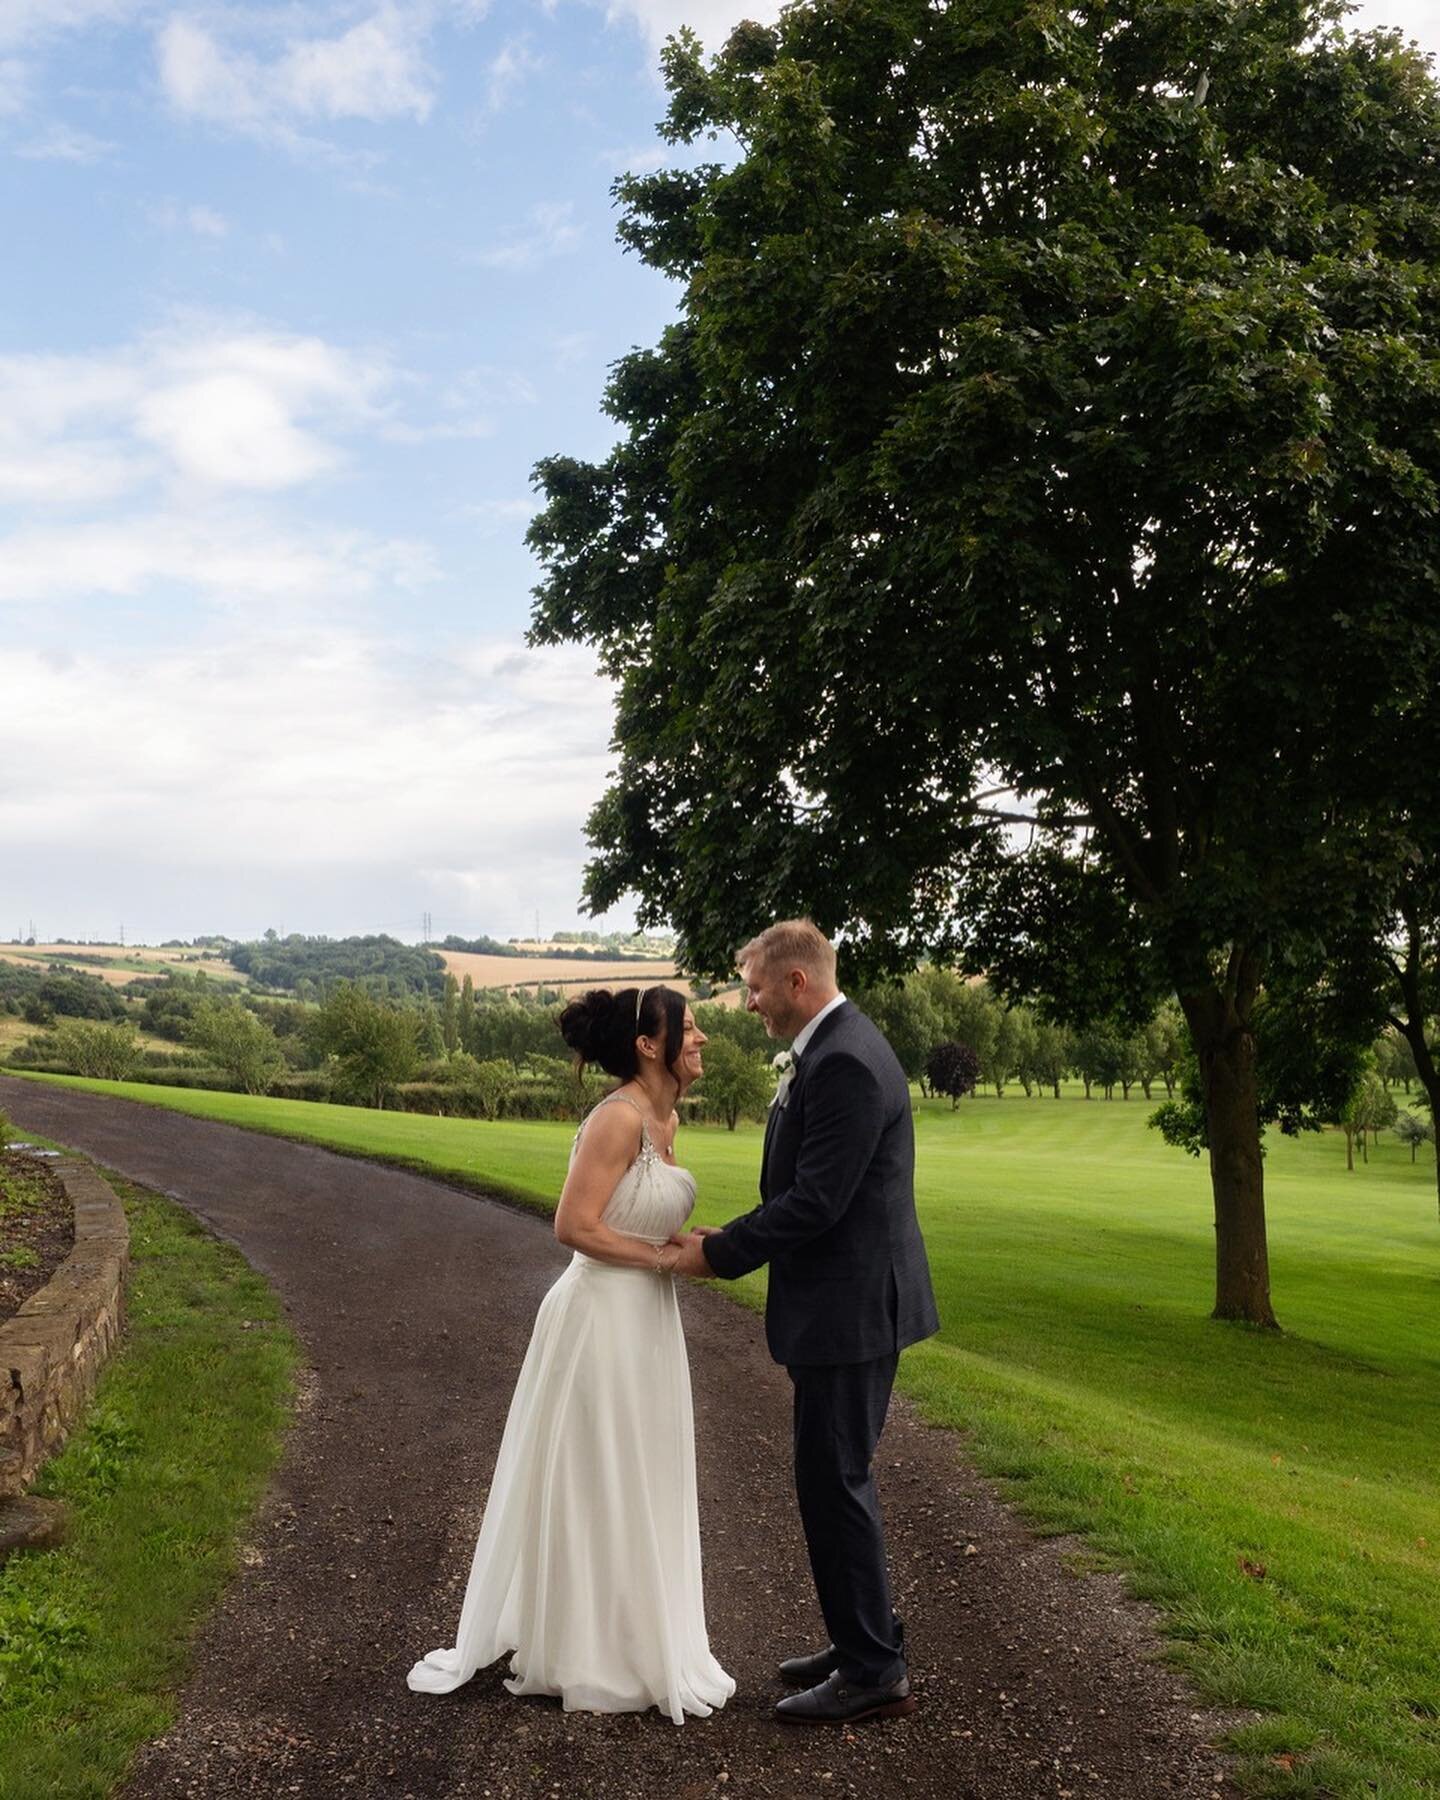 I had the privilege of taking photos of Tim &amp; Lucies wedding at the lovely @sitwellparkgolfclub 🏞️ You are such a lovely couple and it was amazing getting to know you and your family 🤍